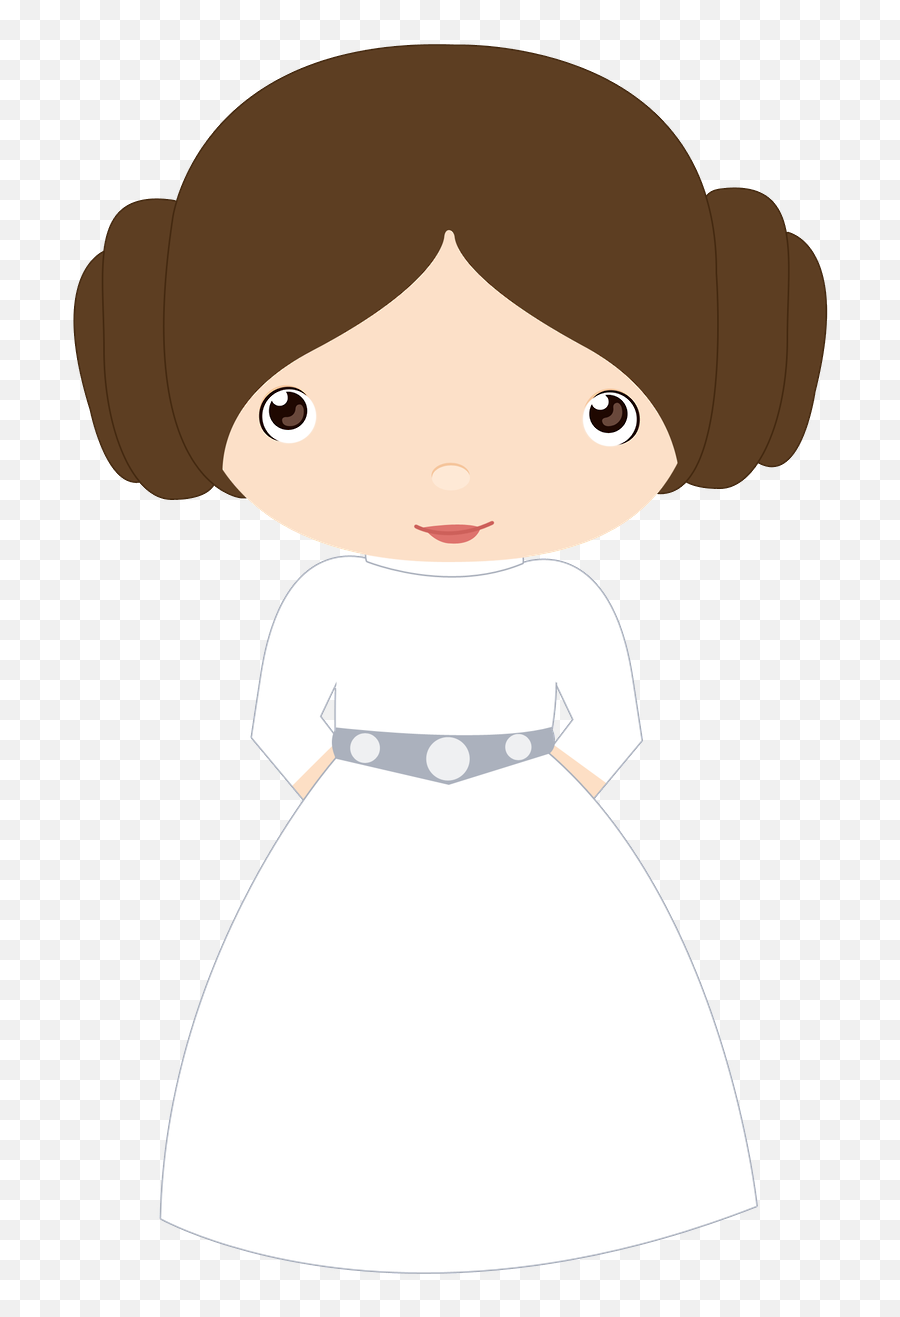 Showering Clipart Getting Dressed - Princess Leia Clipart Emoji,Get Dressed Clipart